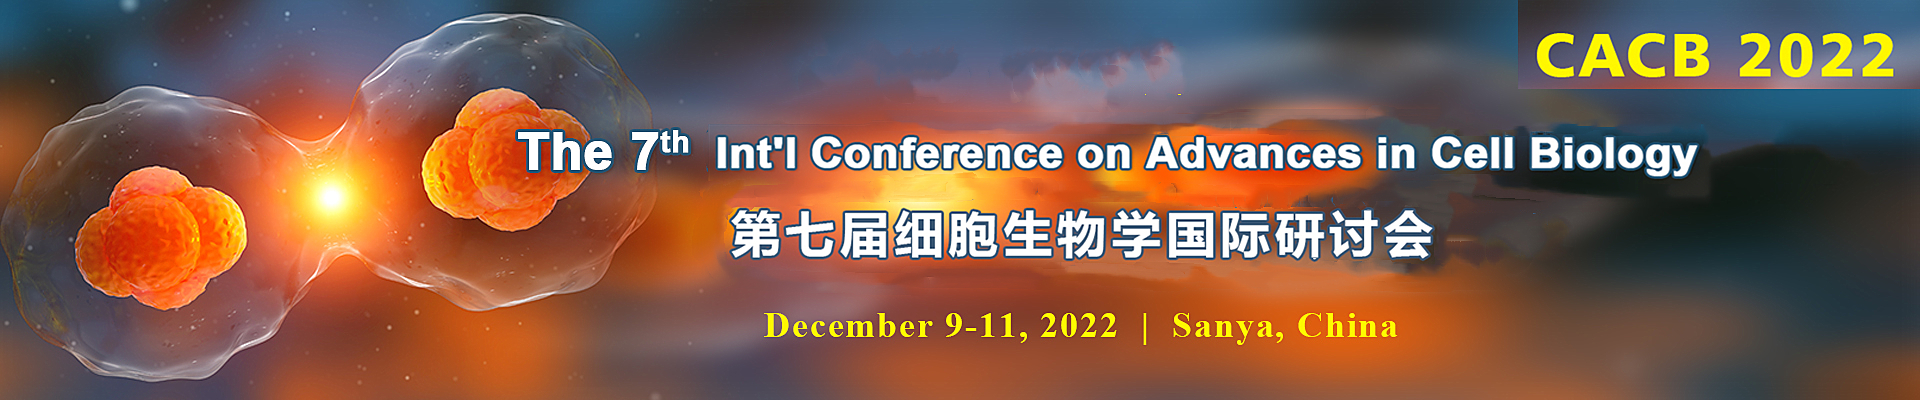 The 7th Int'l Conference on Advances in Cell Biology (CACB 2022)